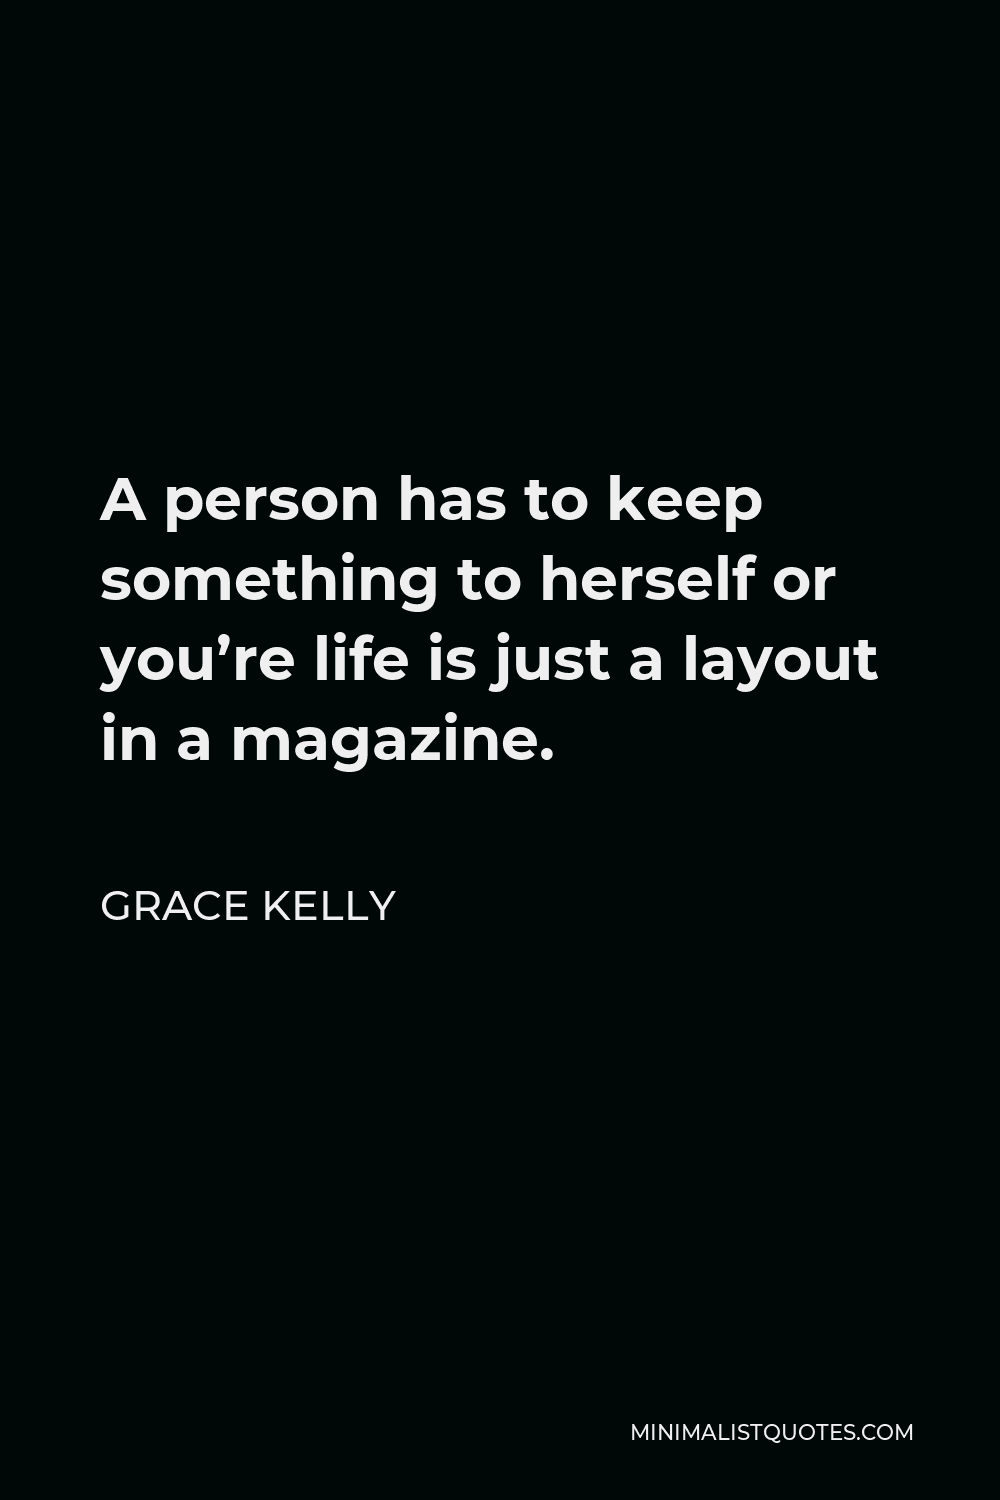 Grace Kelly Quote - A person has to keep something to herself or you’re life is just a layout in a magazine.